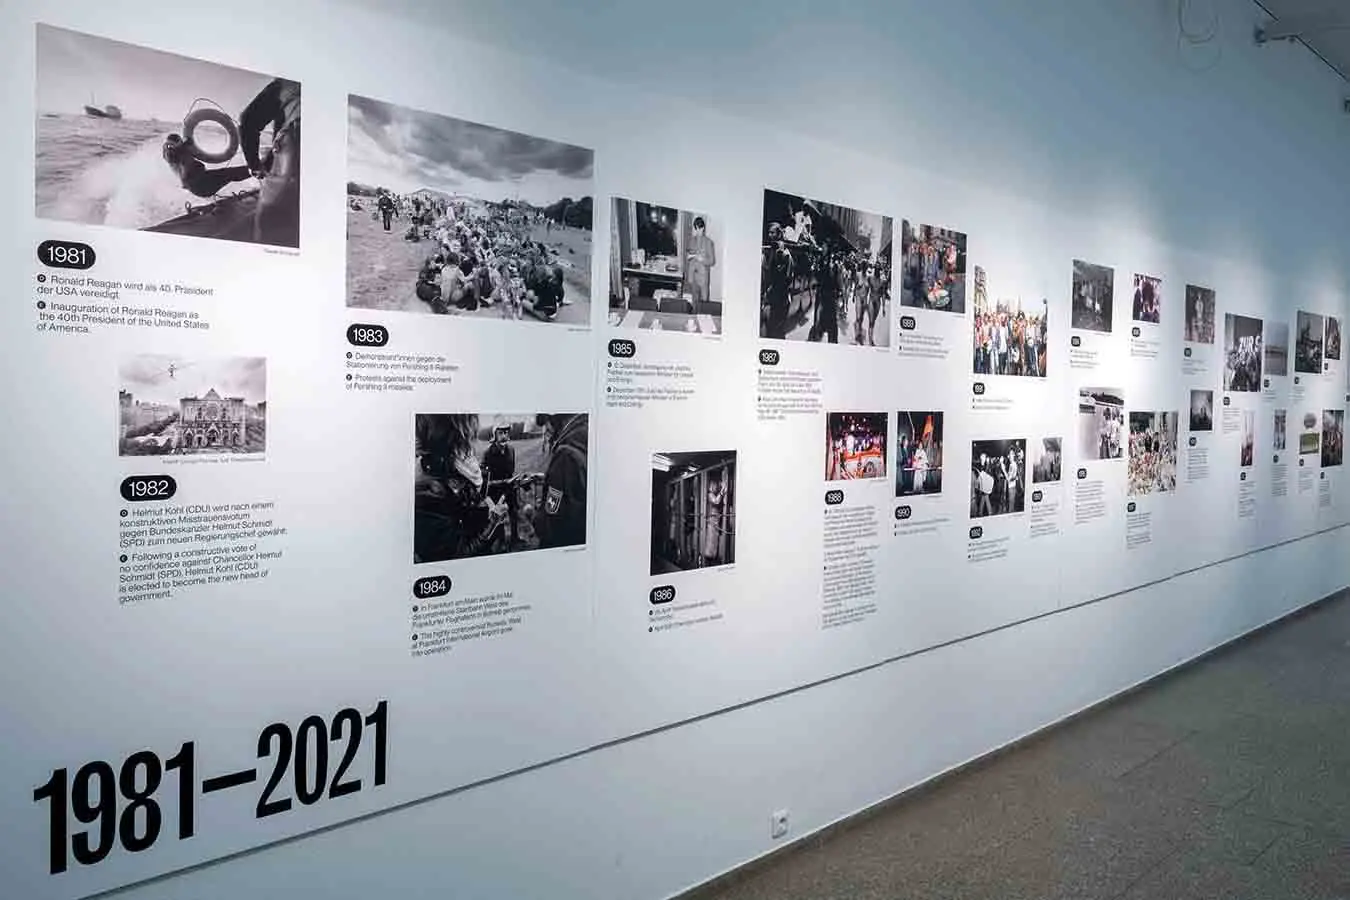 Timeline of laif history (1981-2021) supported with photos printed as a WhiteWall Forex print.